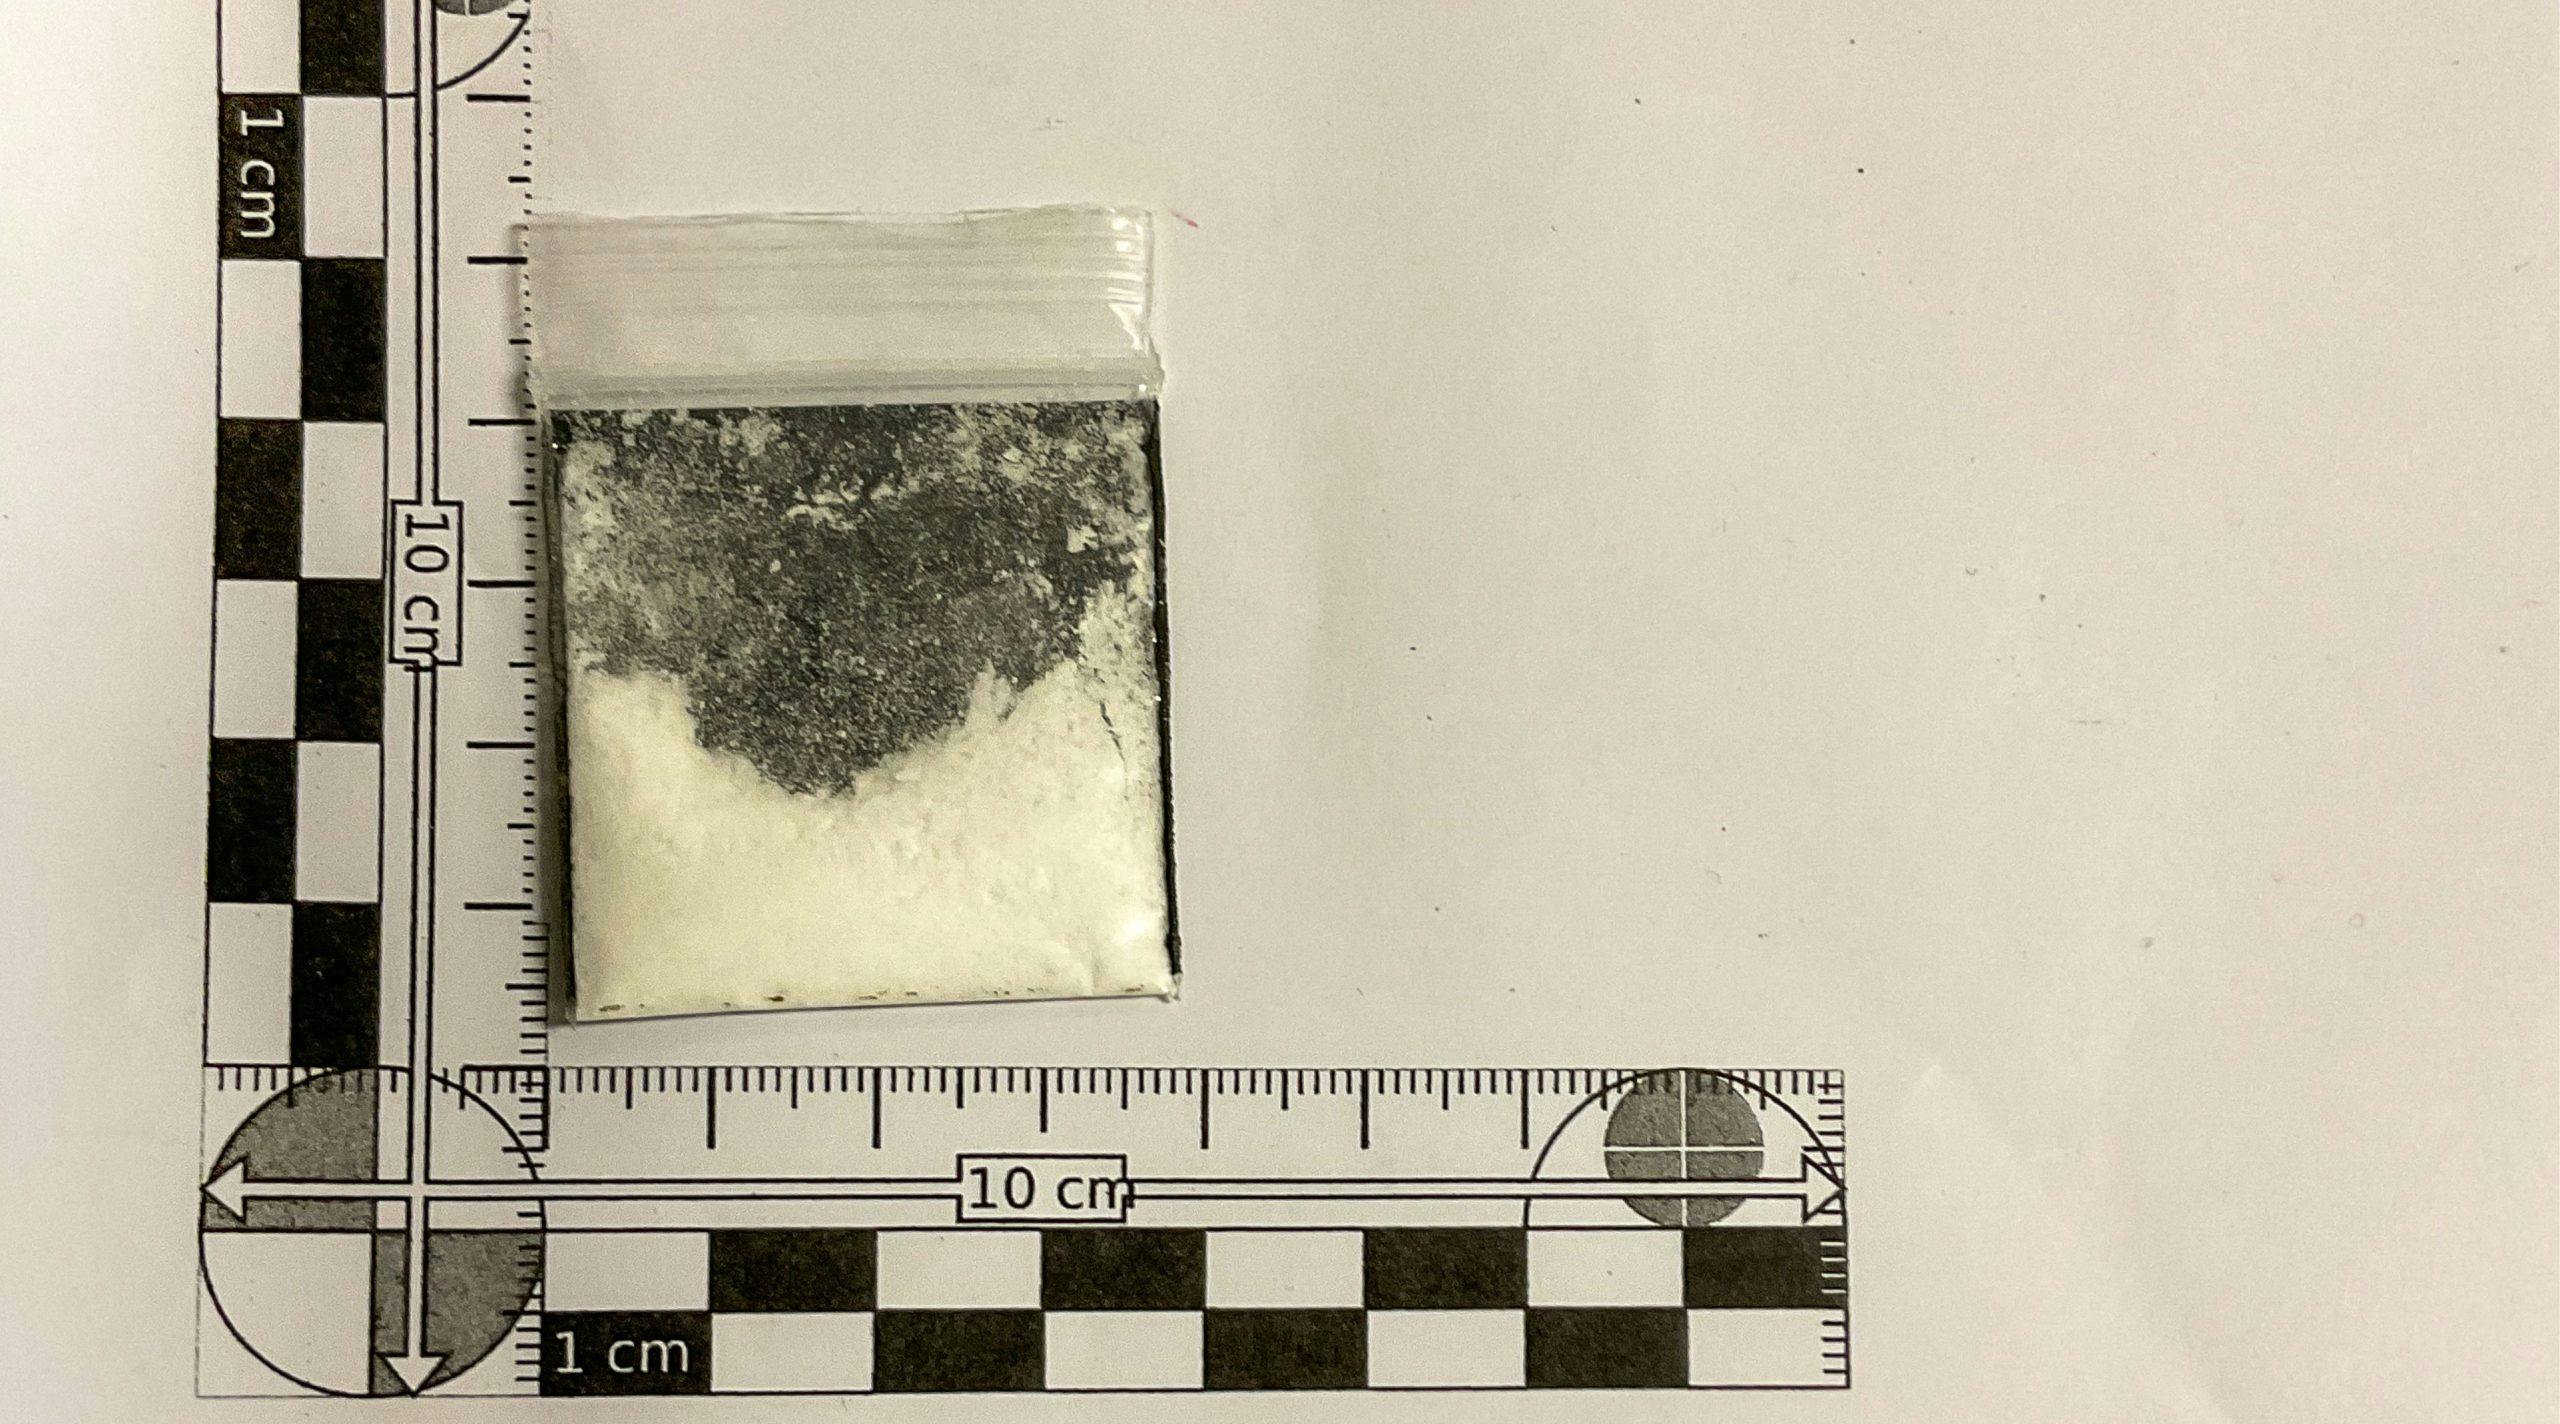 White powder in a small clear bag against a 10cm ruler